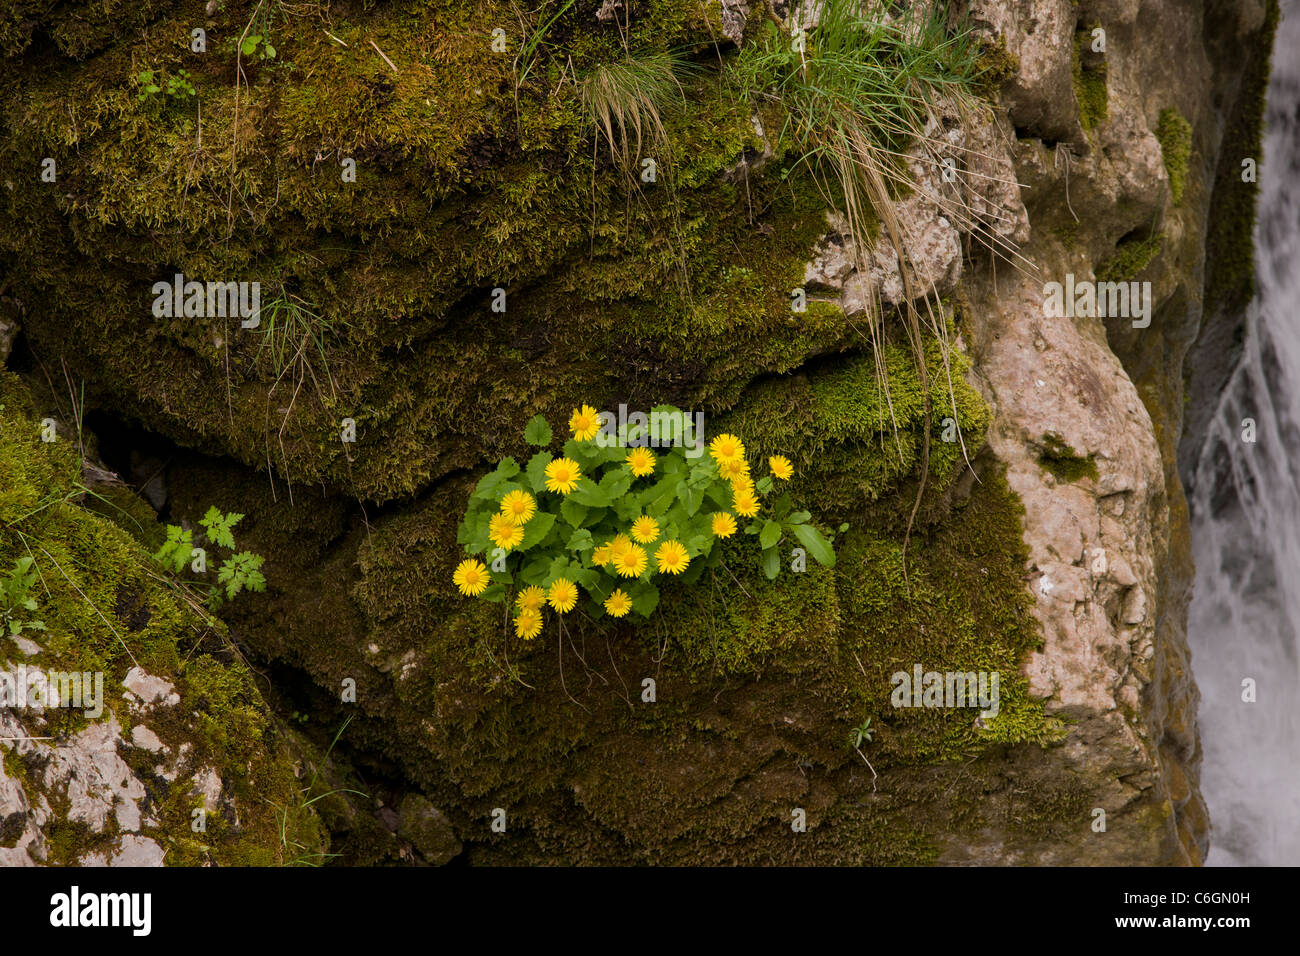 A Leopard's Bane, Doronicum columnae, growing by a waterfall on the River Trigrad, Trigrad gorge, Rhodopi Mountains, Bulgaria Stock Photo